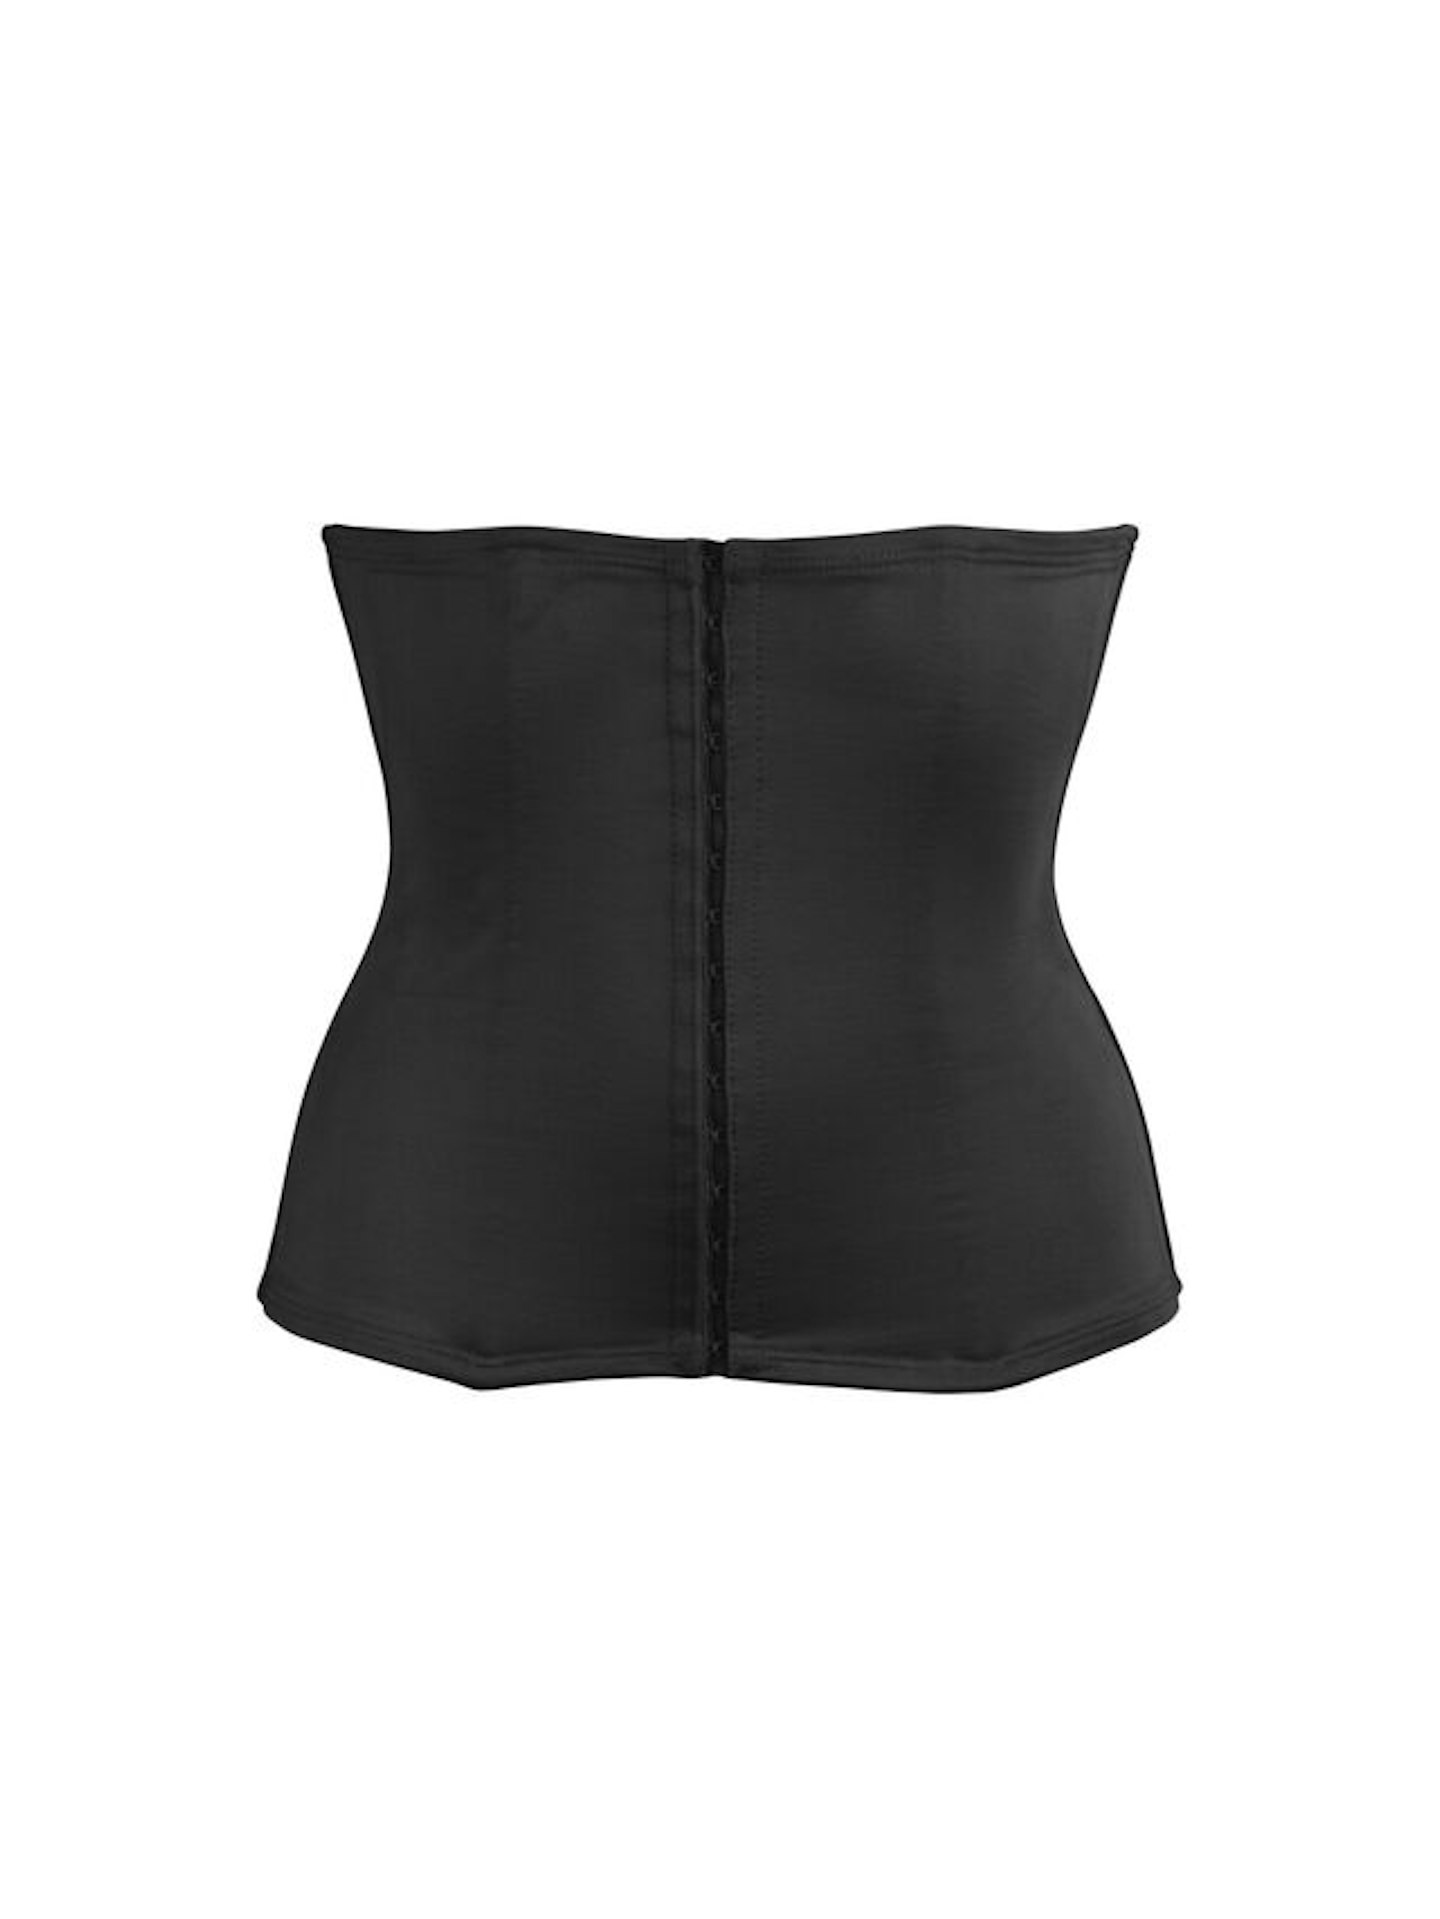 Trying ShaperX Shapewear + Corsets (affordable and comfortable